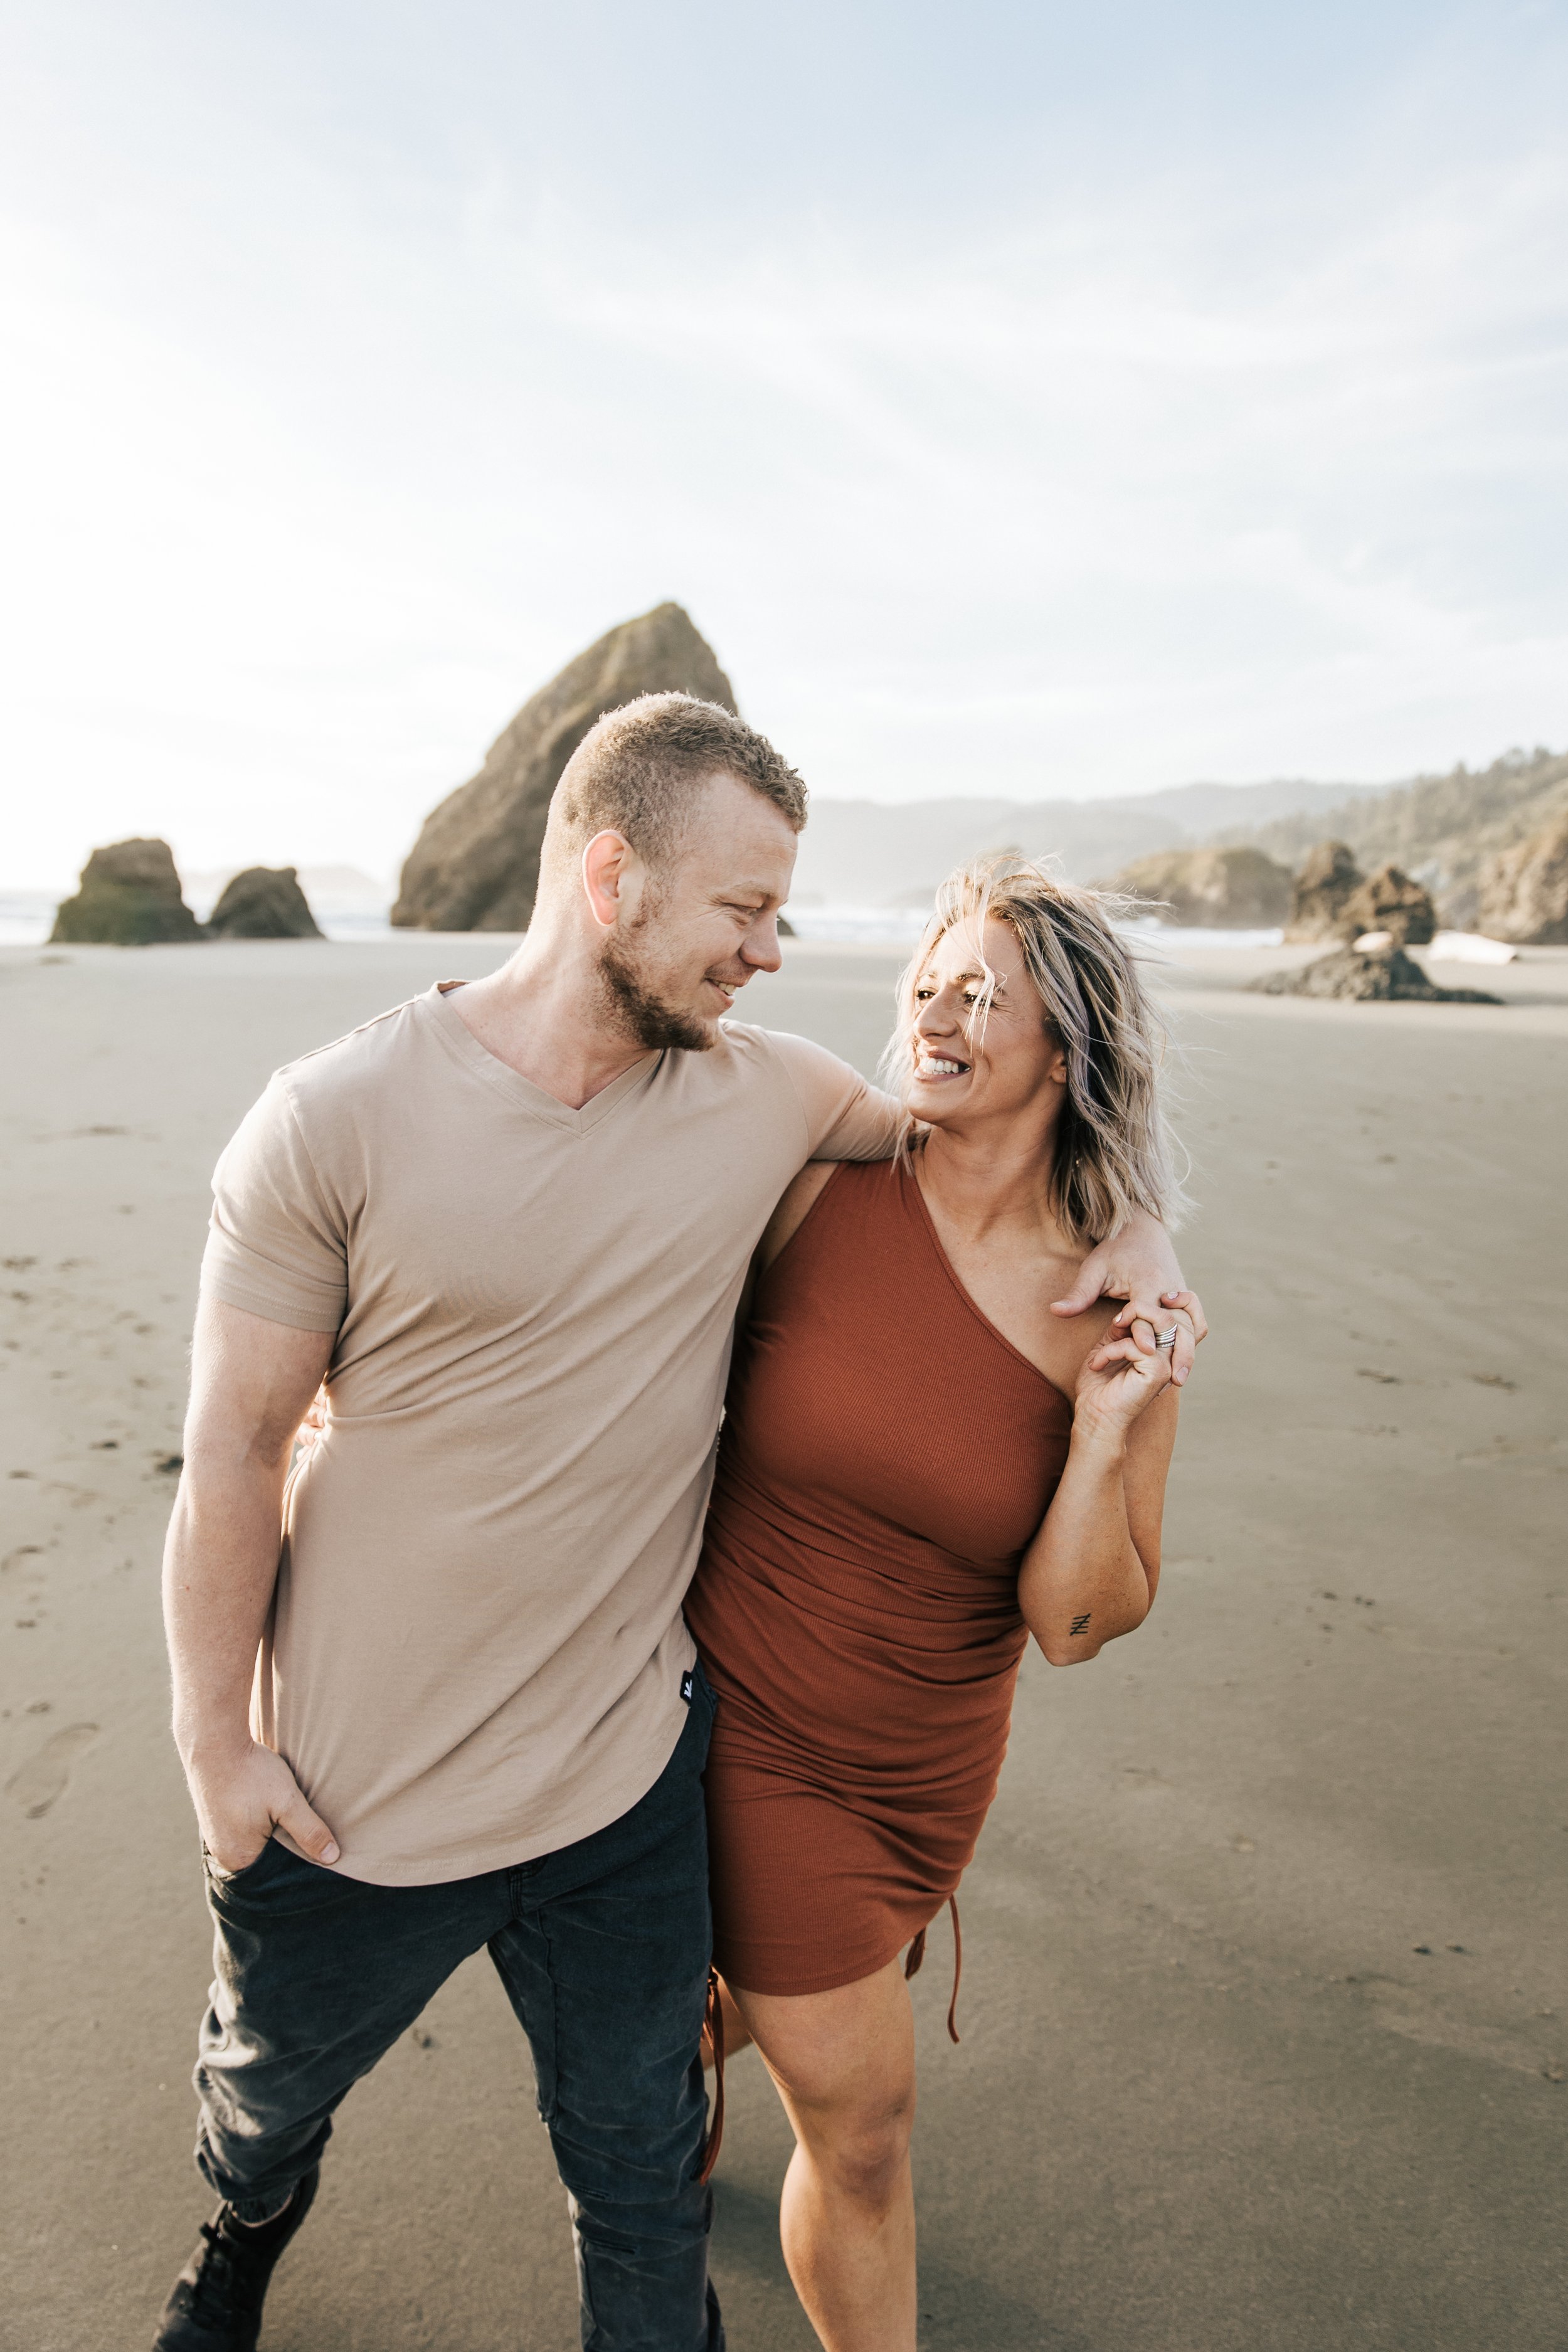  Brookings, Oregon engagement session. Couple hugs on the beach for a summer couples session on their anniversary. Husband and wife run around the beach with seastacks and rocks on the beach around them, barefoot in the sand.  